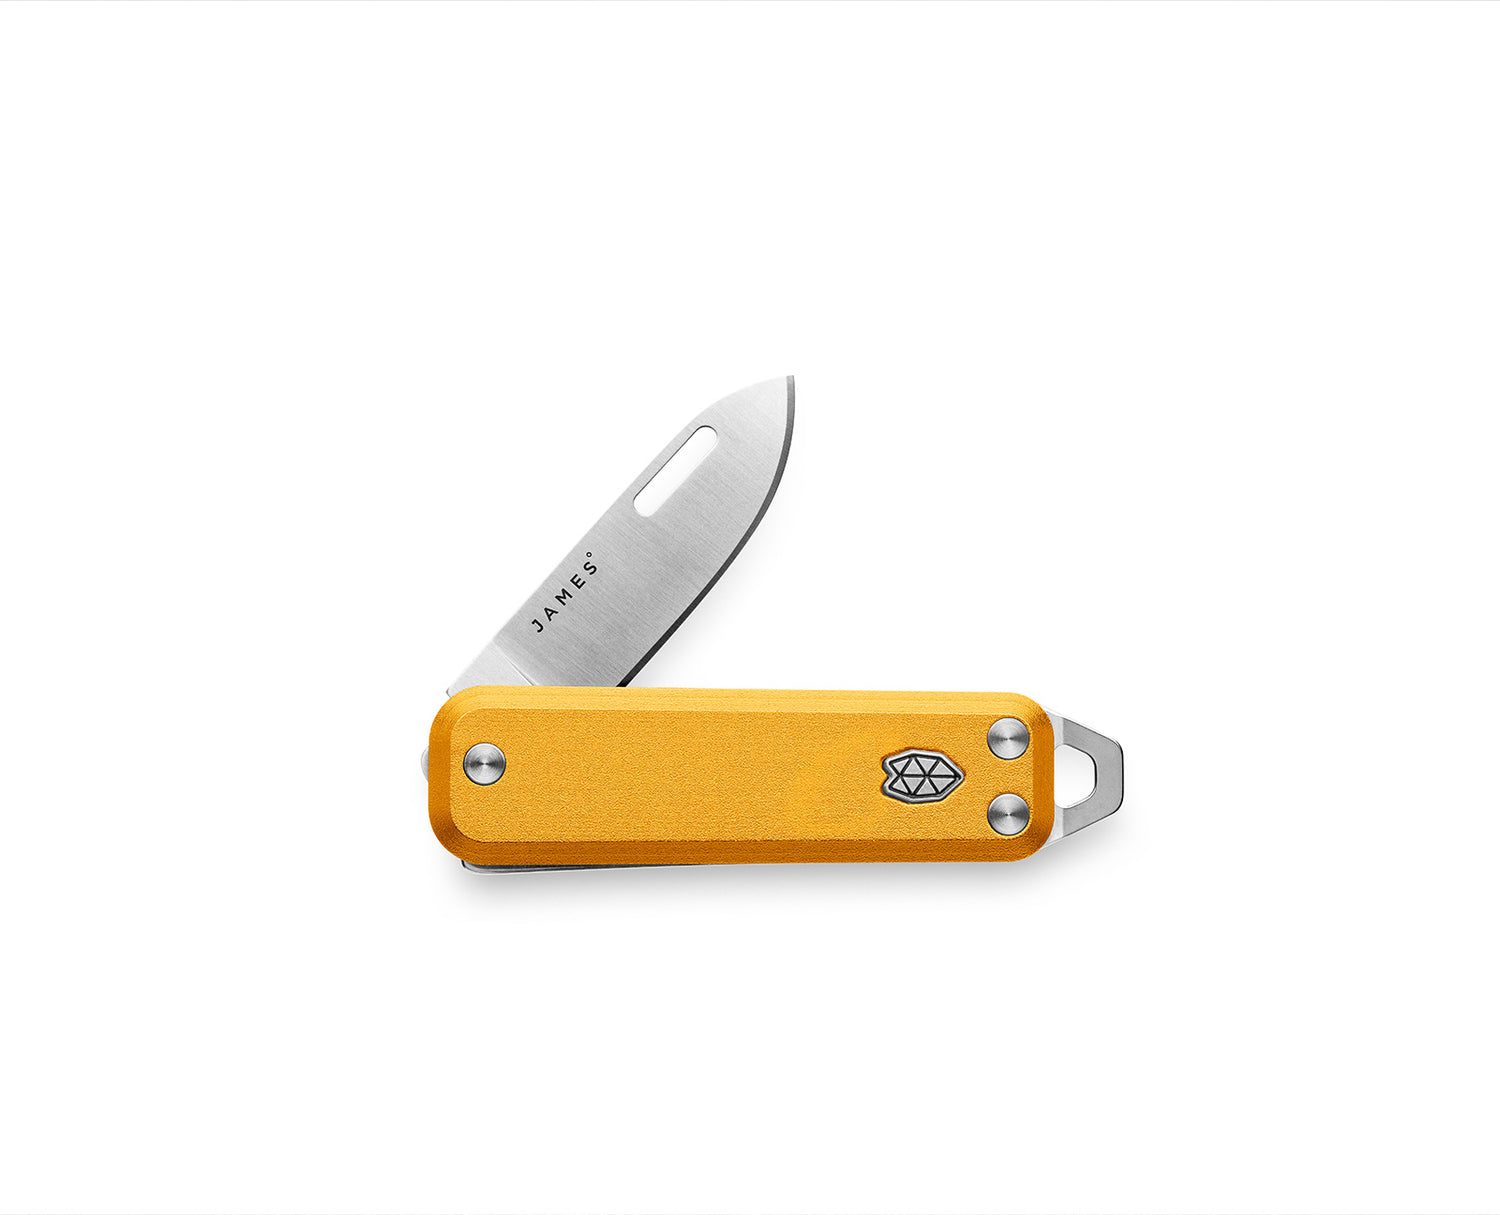 The Elko knife with canary handle and stainless steel blade.